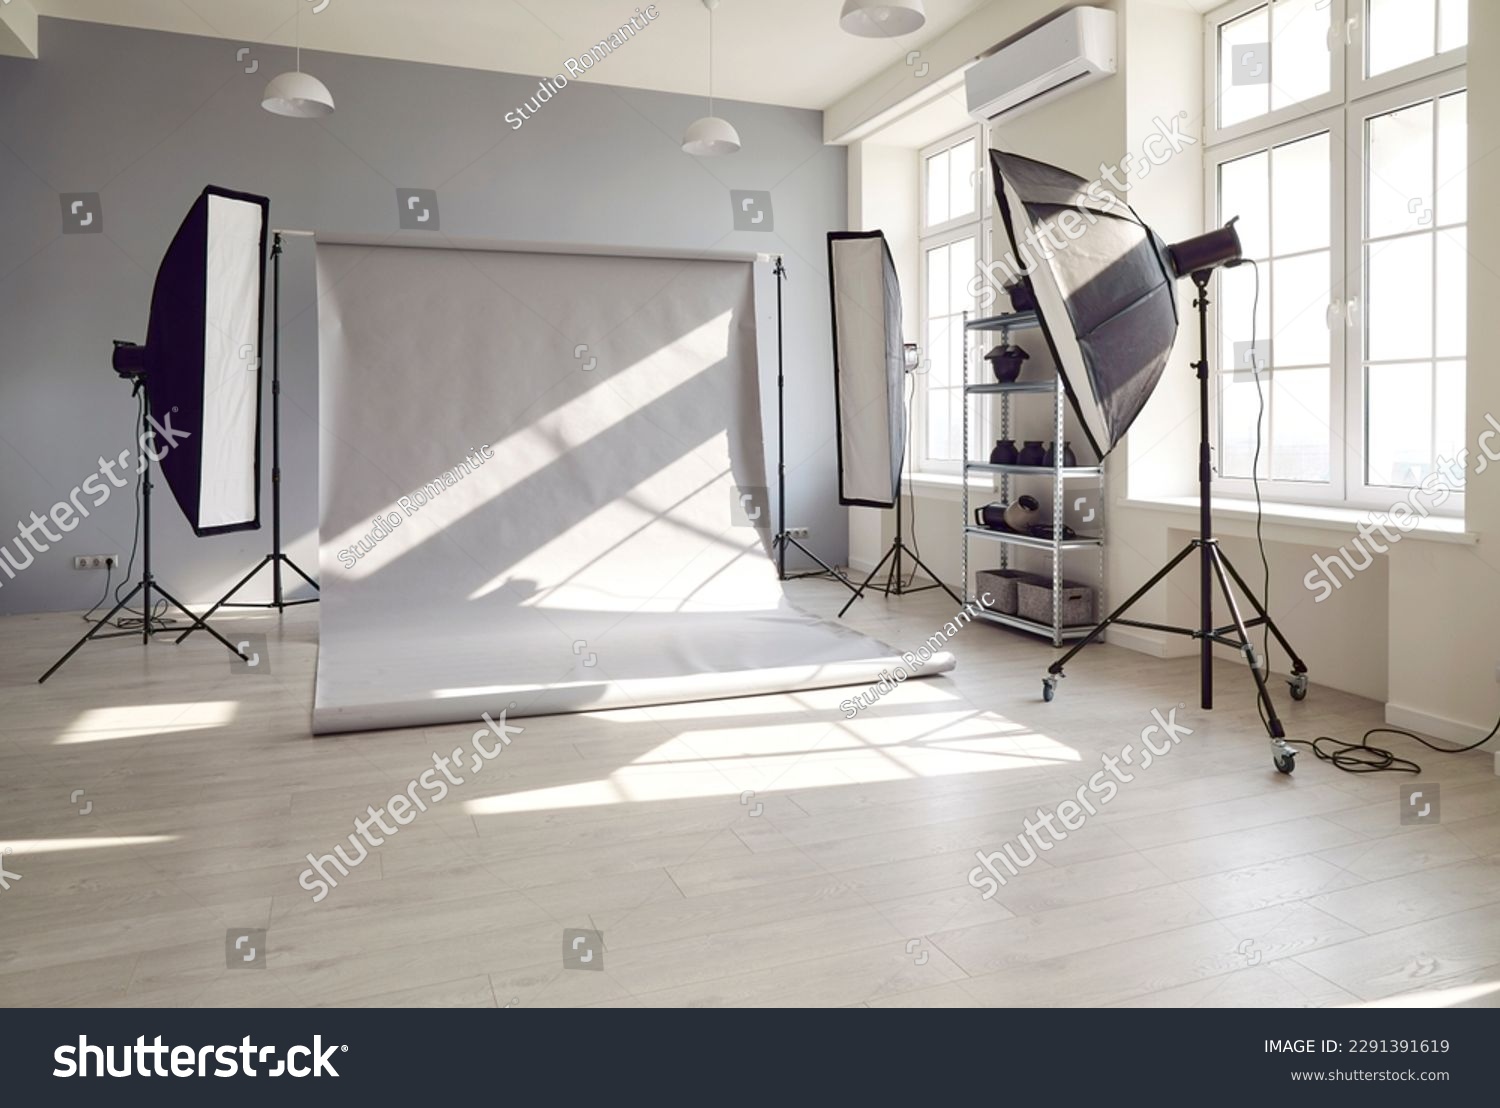 Photo session studio. Photographer's workplace in commercial atelier agency. Sunny workspace interior with grey backdrop, backstage and lamp, umbrella, flashlight illumination equipment kit. No people #2291391619